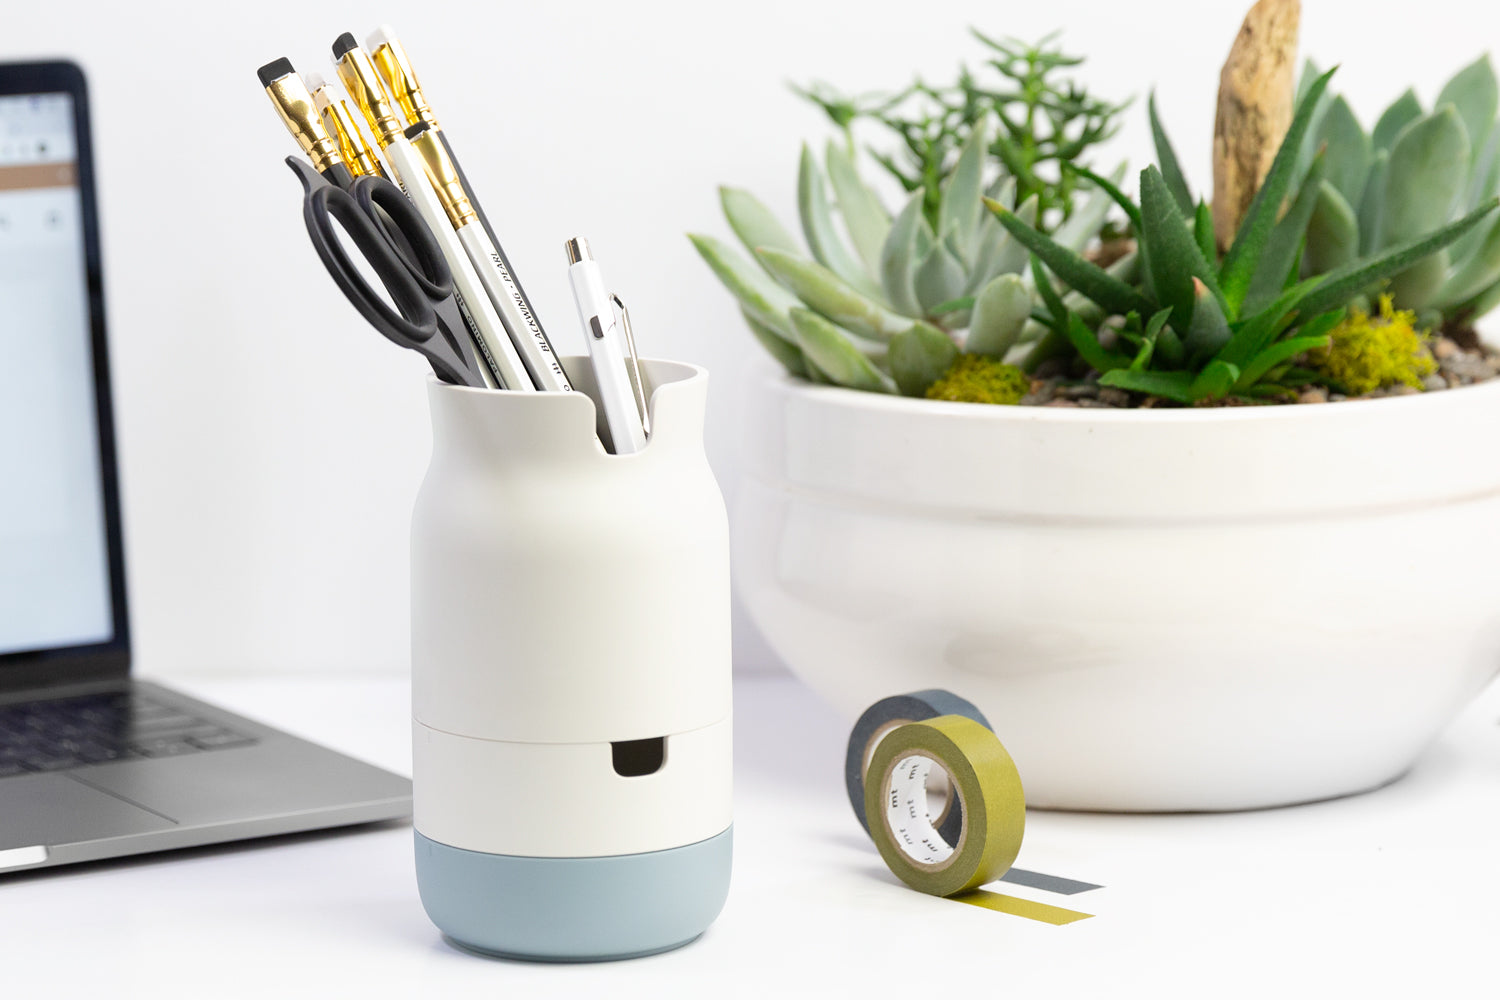 Minimalist office organization supplies, including a white pencil organization cup, white vase, and laptop.